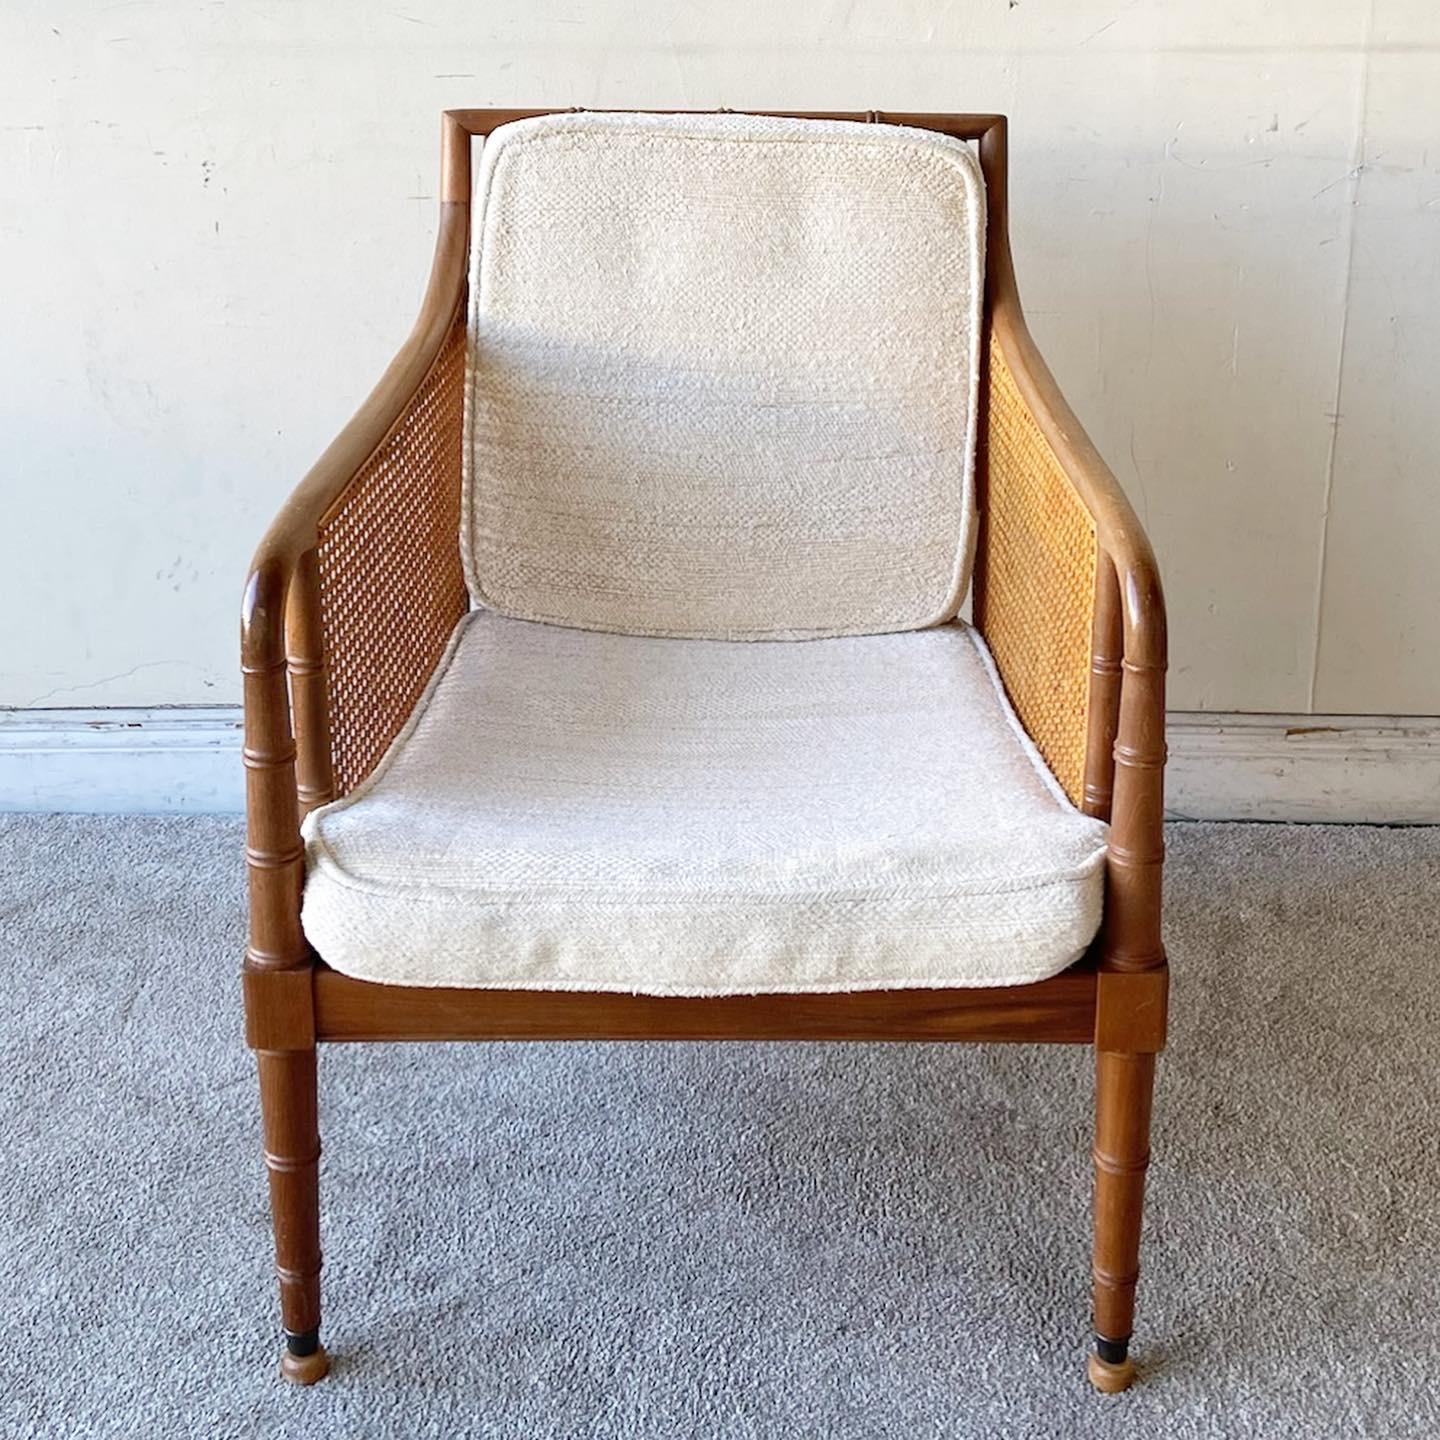 Exceptional vintage faux bamboo arm chair. Features can sides and back rests with two white cushions.
 